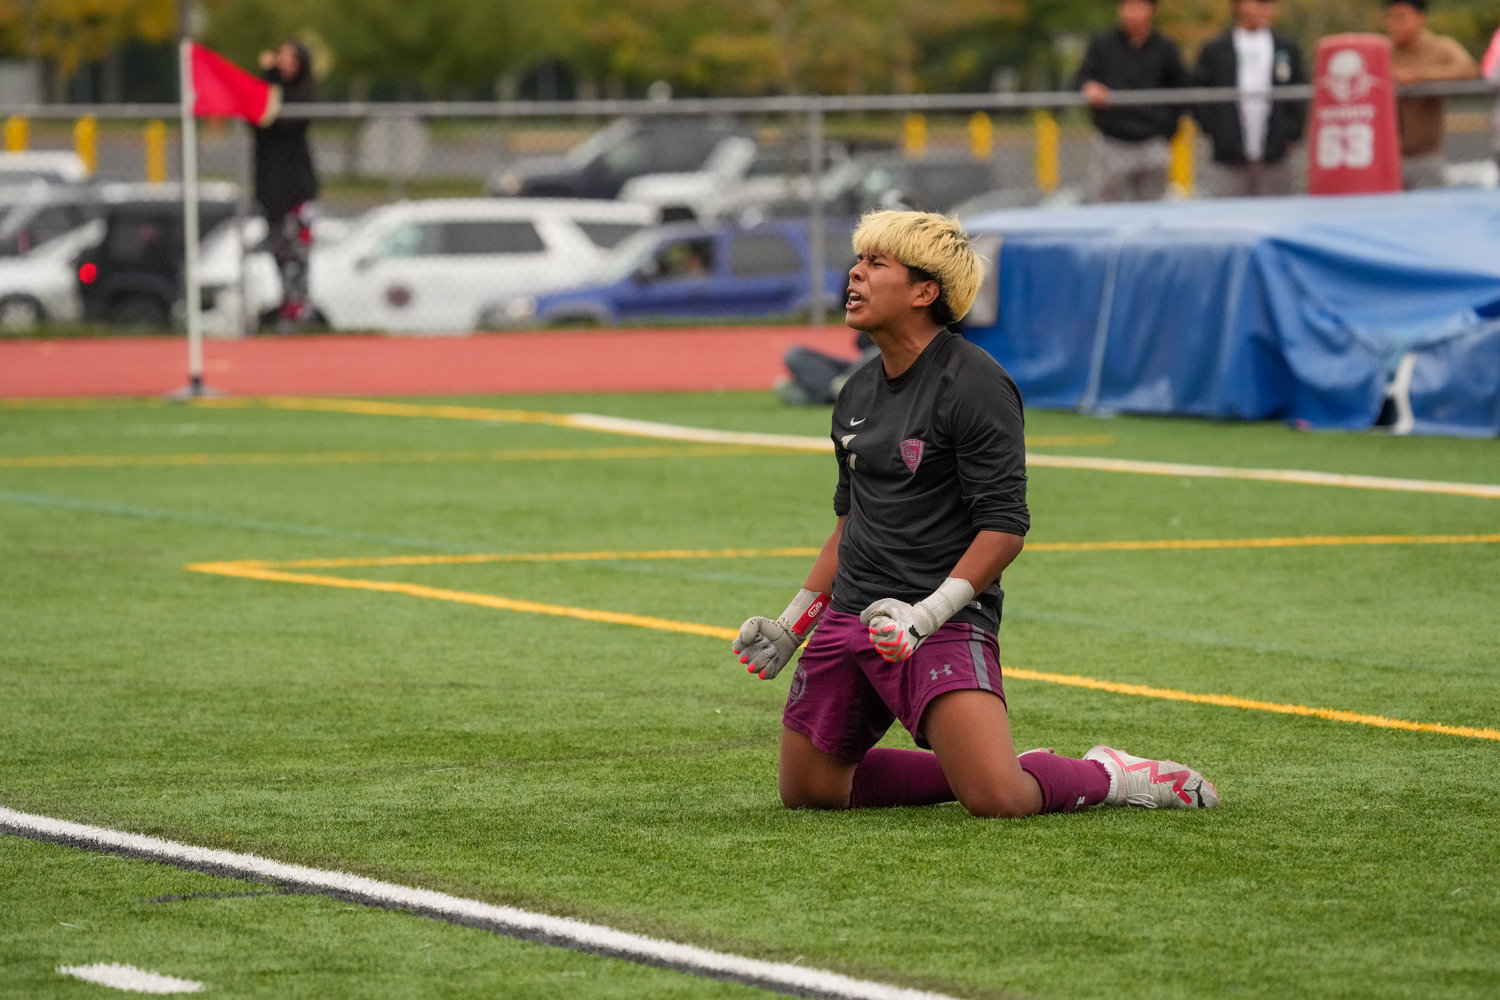 East Hampton senior goalie Nicholas Guerrero is pumped up after his team held on for a 1-0 victory over East Islip on Saturday.   RON ESPOSITO